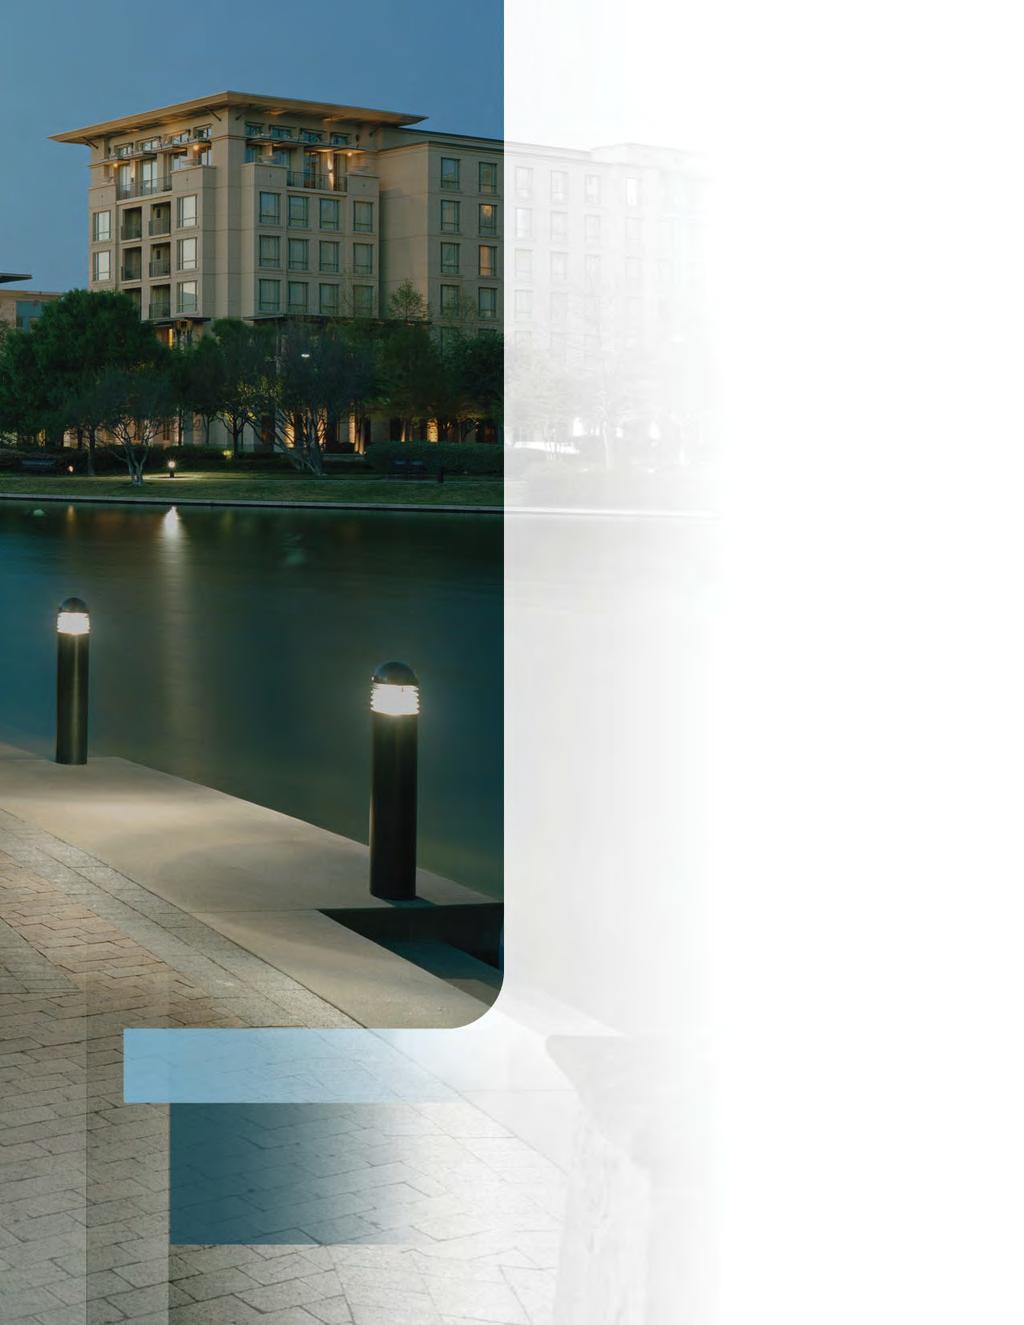 LED Bollards As distance to architecture decreases, luminaire height and scale should also decrease.